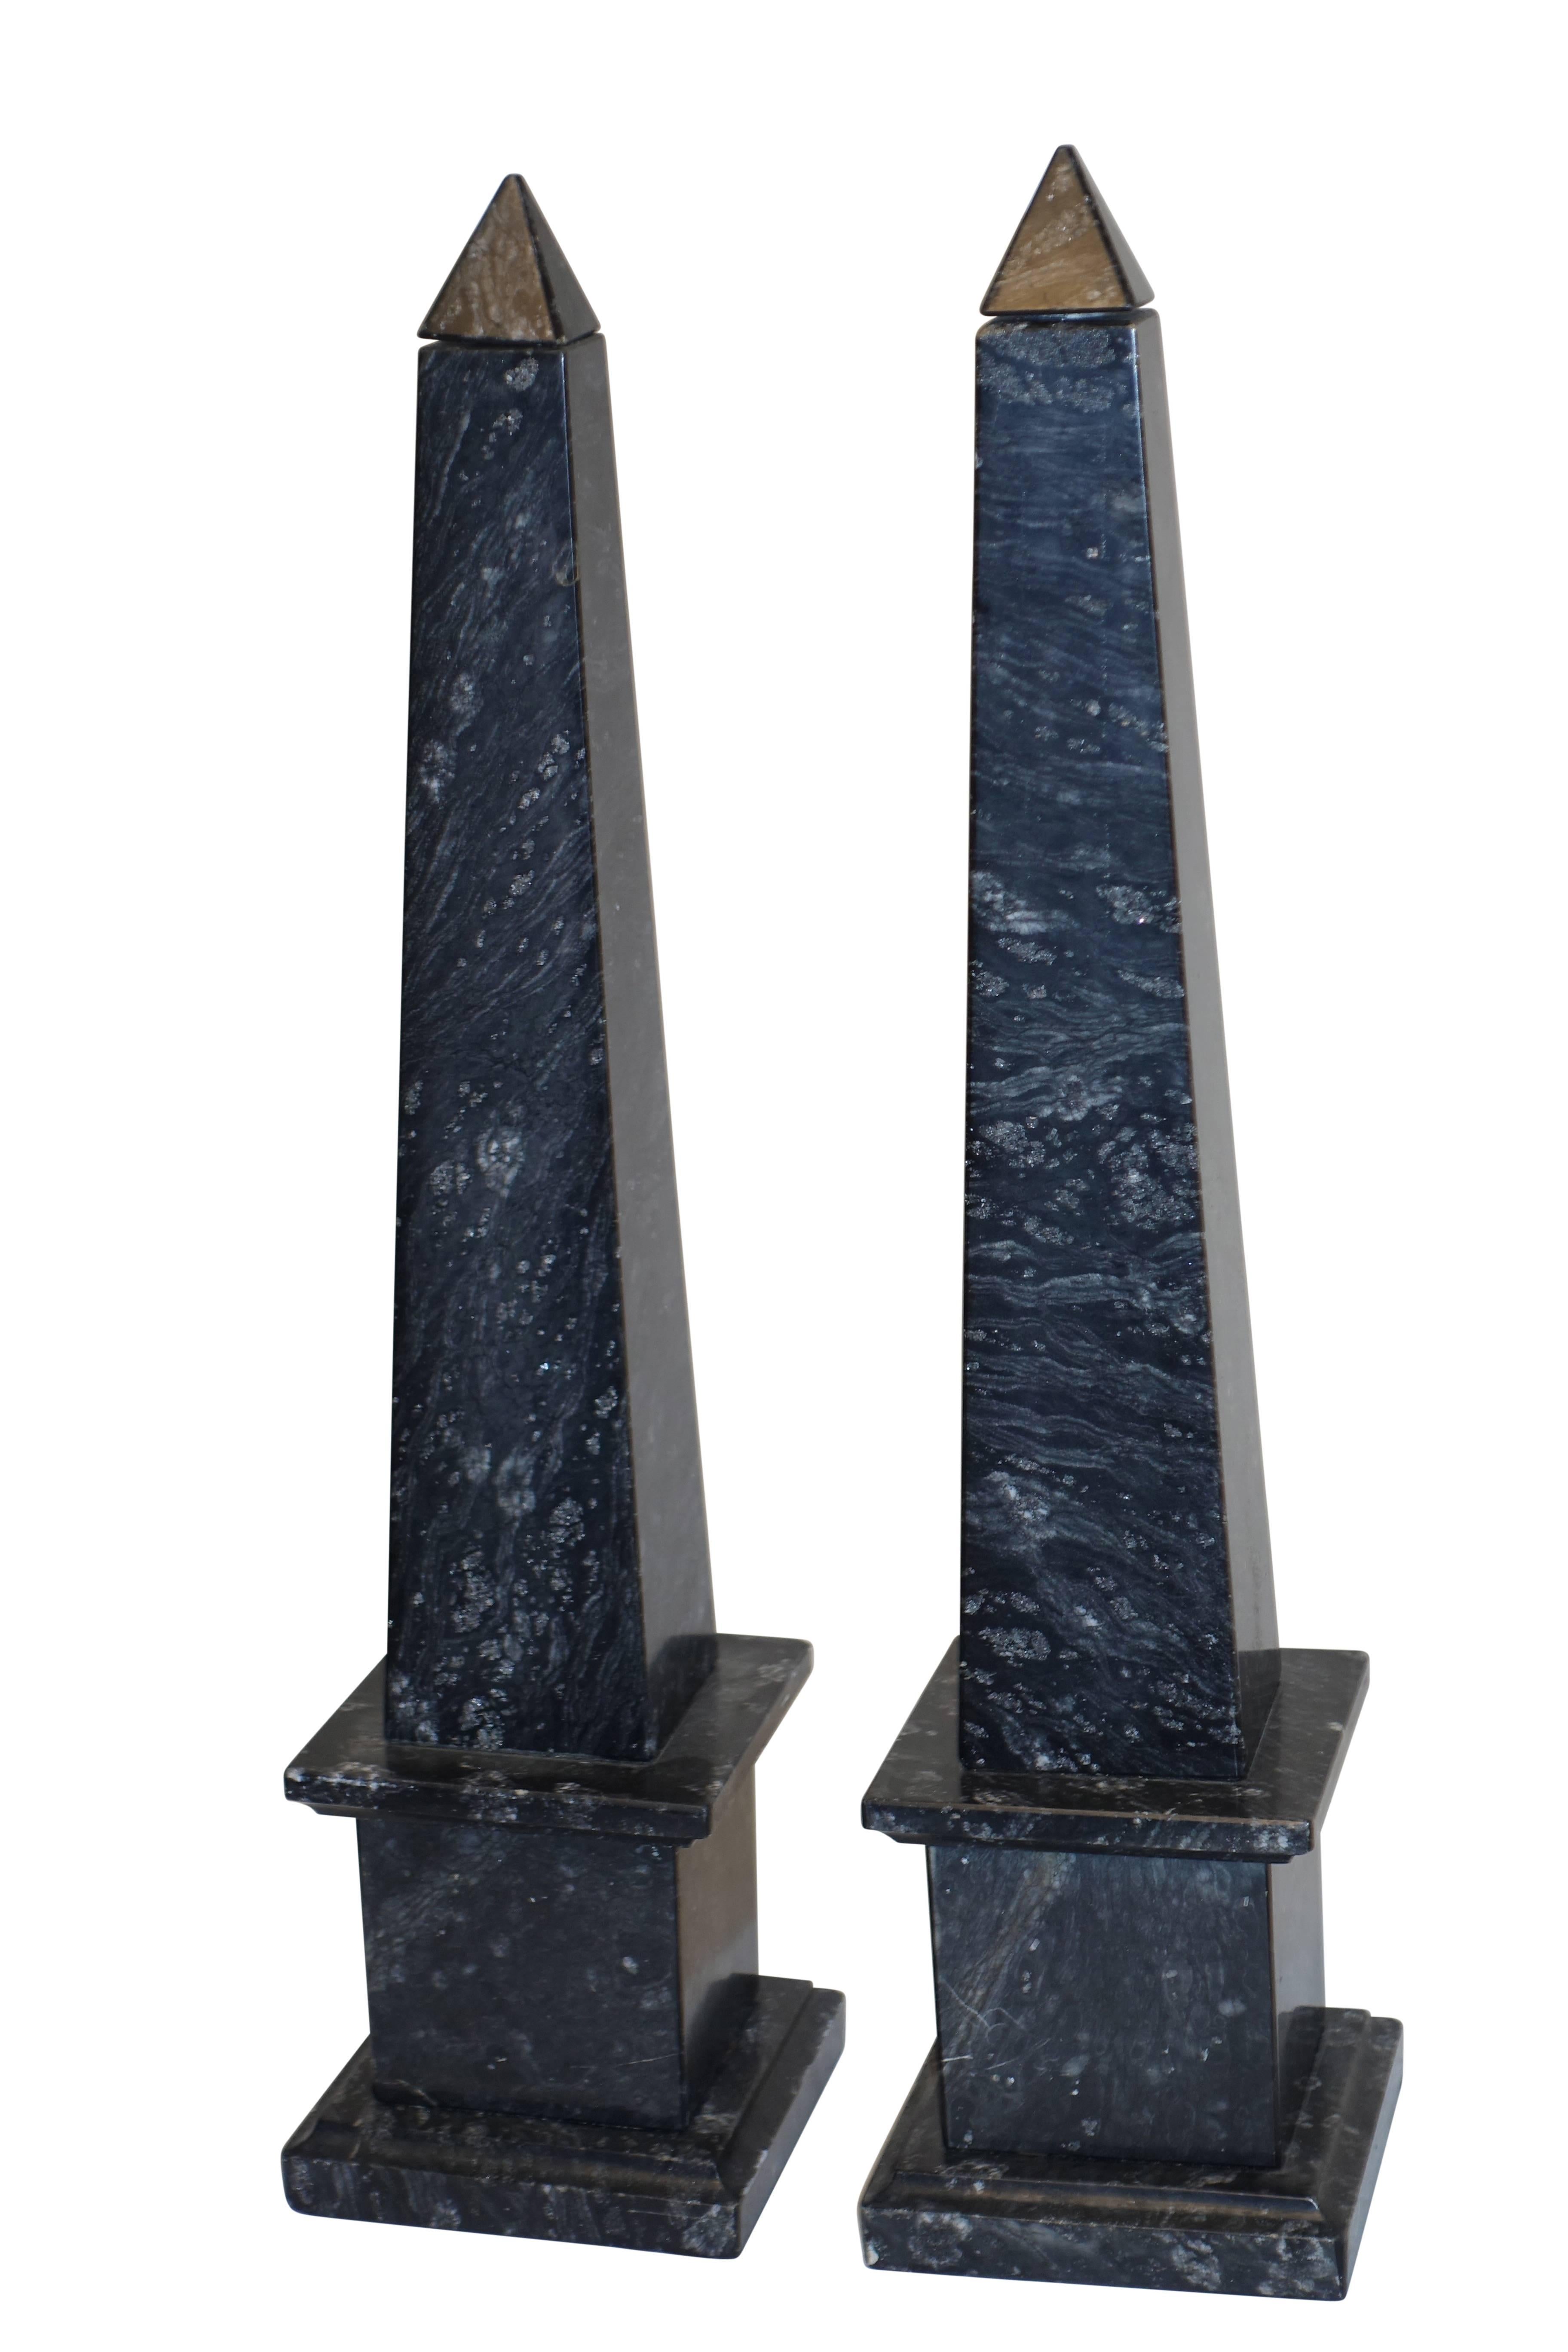 A pair of black marble obelisks with gray veining and fossilized inclusions. These were lamps with the peaked top of the obelisk as the lampshade finial. Could be wired again for lamps if desired. Italy, mid-20th century.